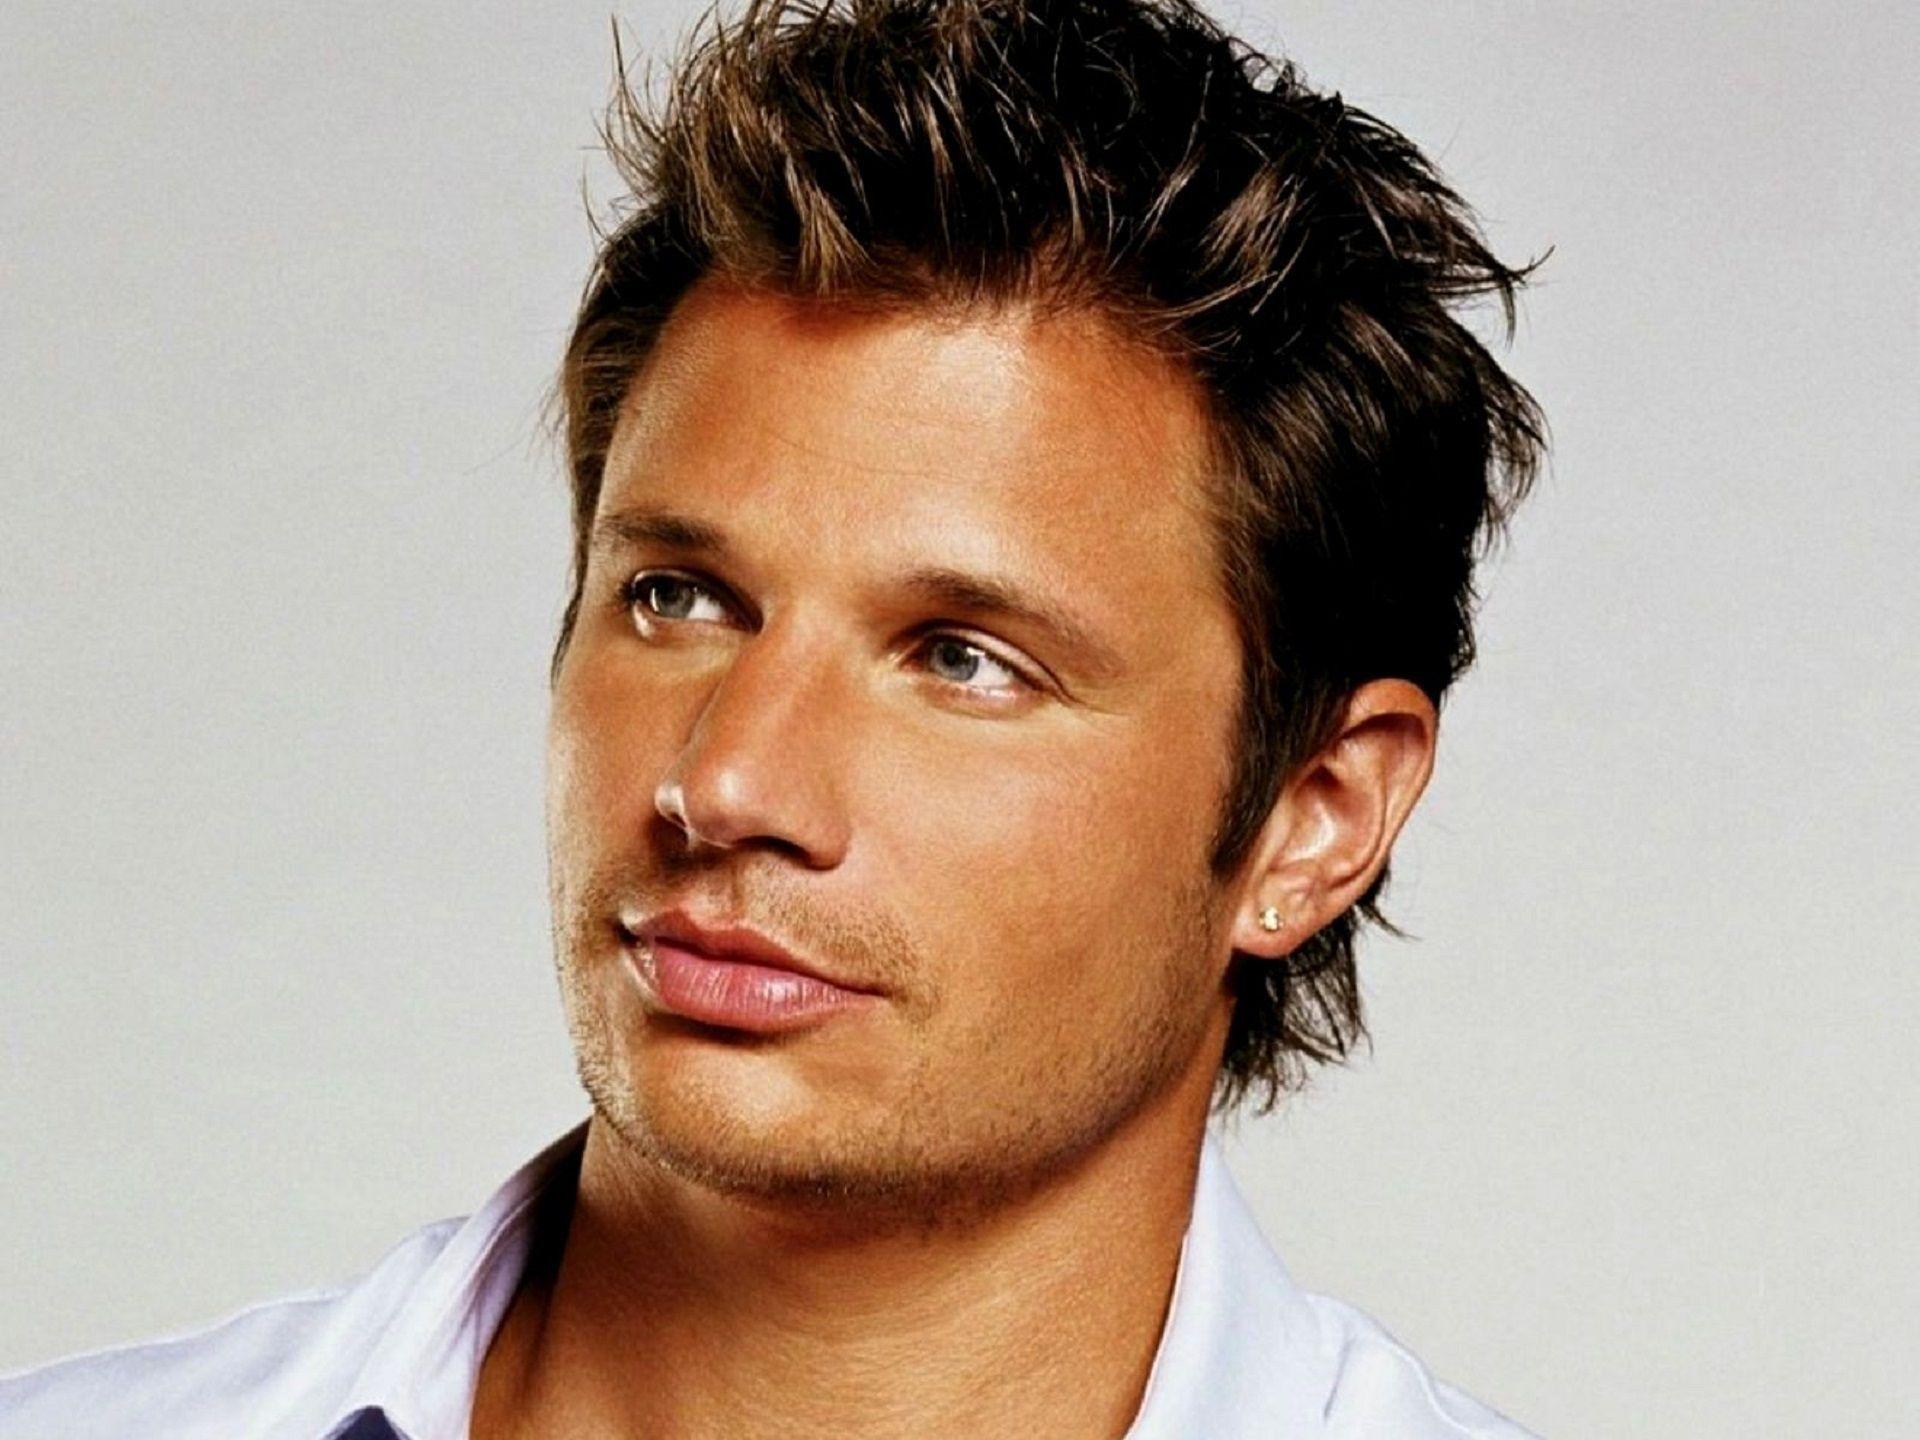 Nick Lachey Wallpaper Image Photo Picture Background